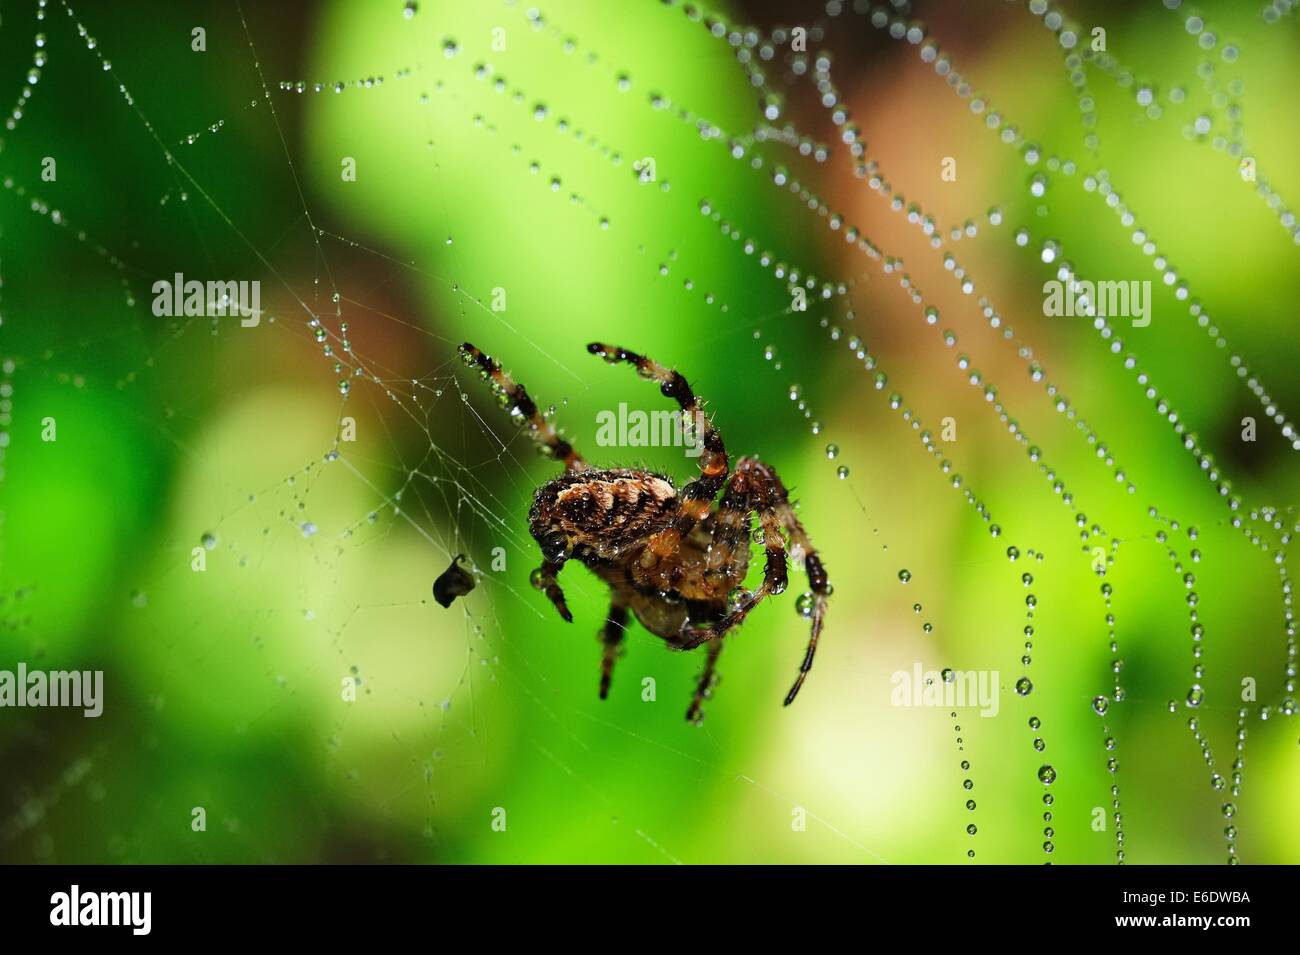 Spider on a Water droplet Web Stock Photo